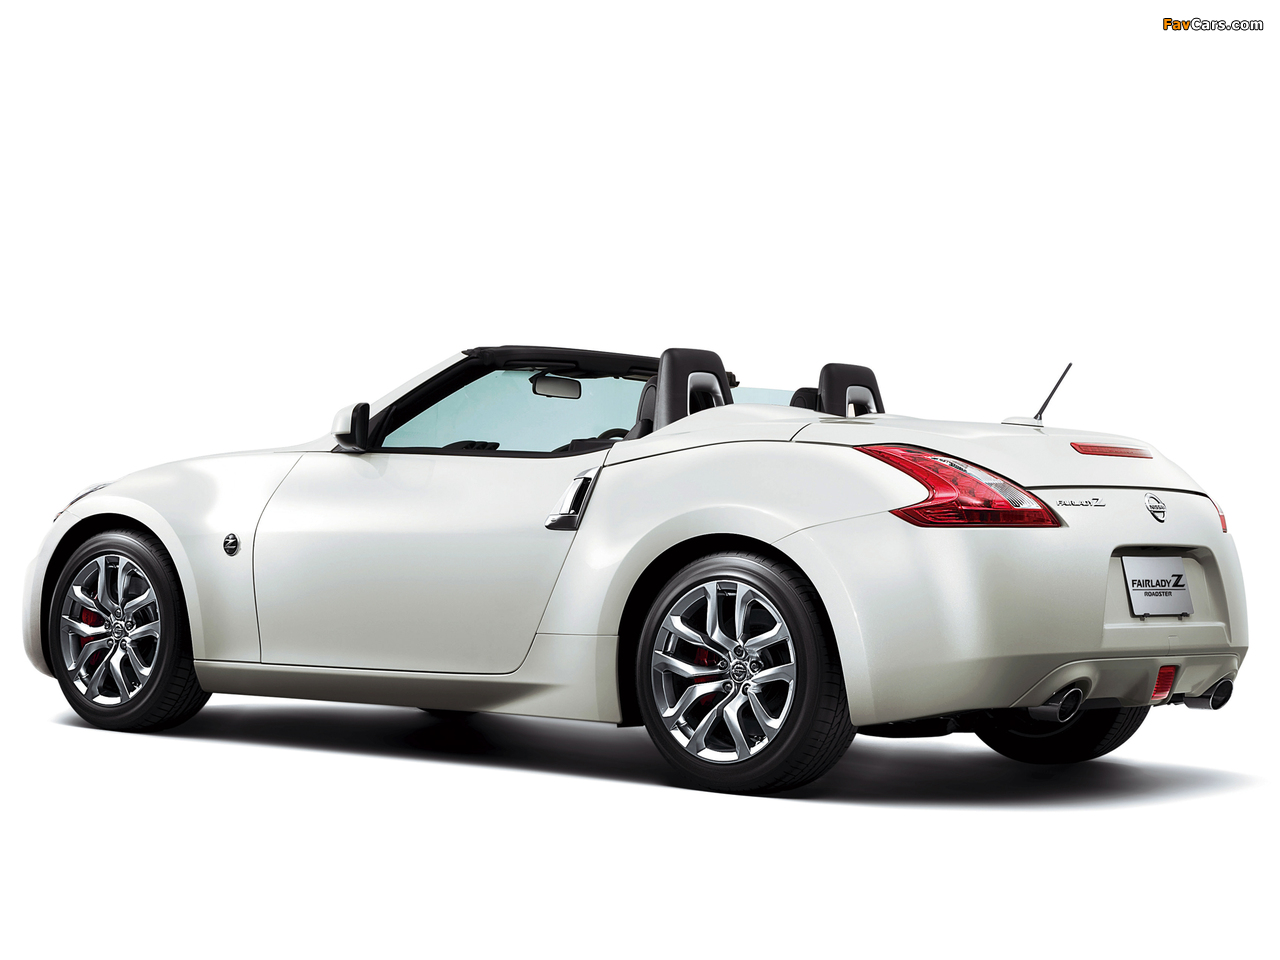 Nissan Fairlady Z Roadster 2012 pictures (1280 x 960)